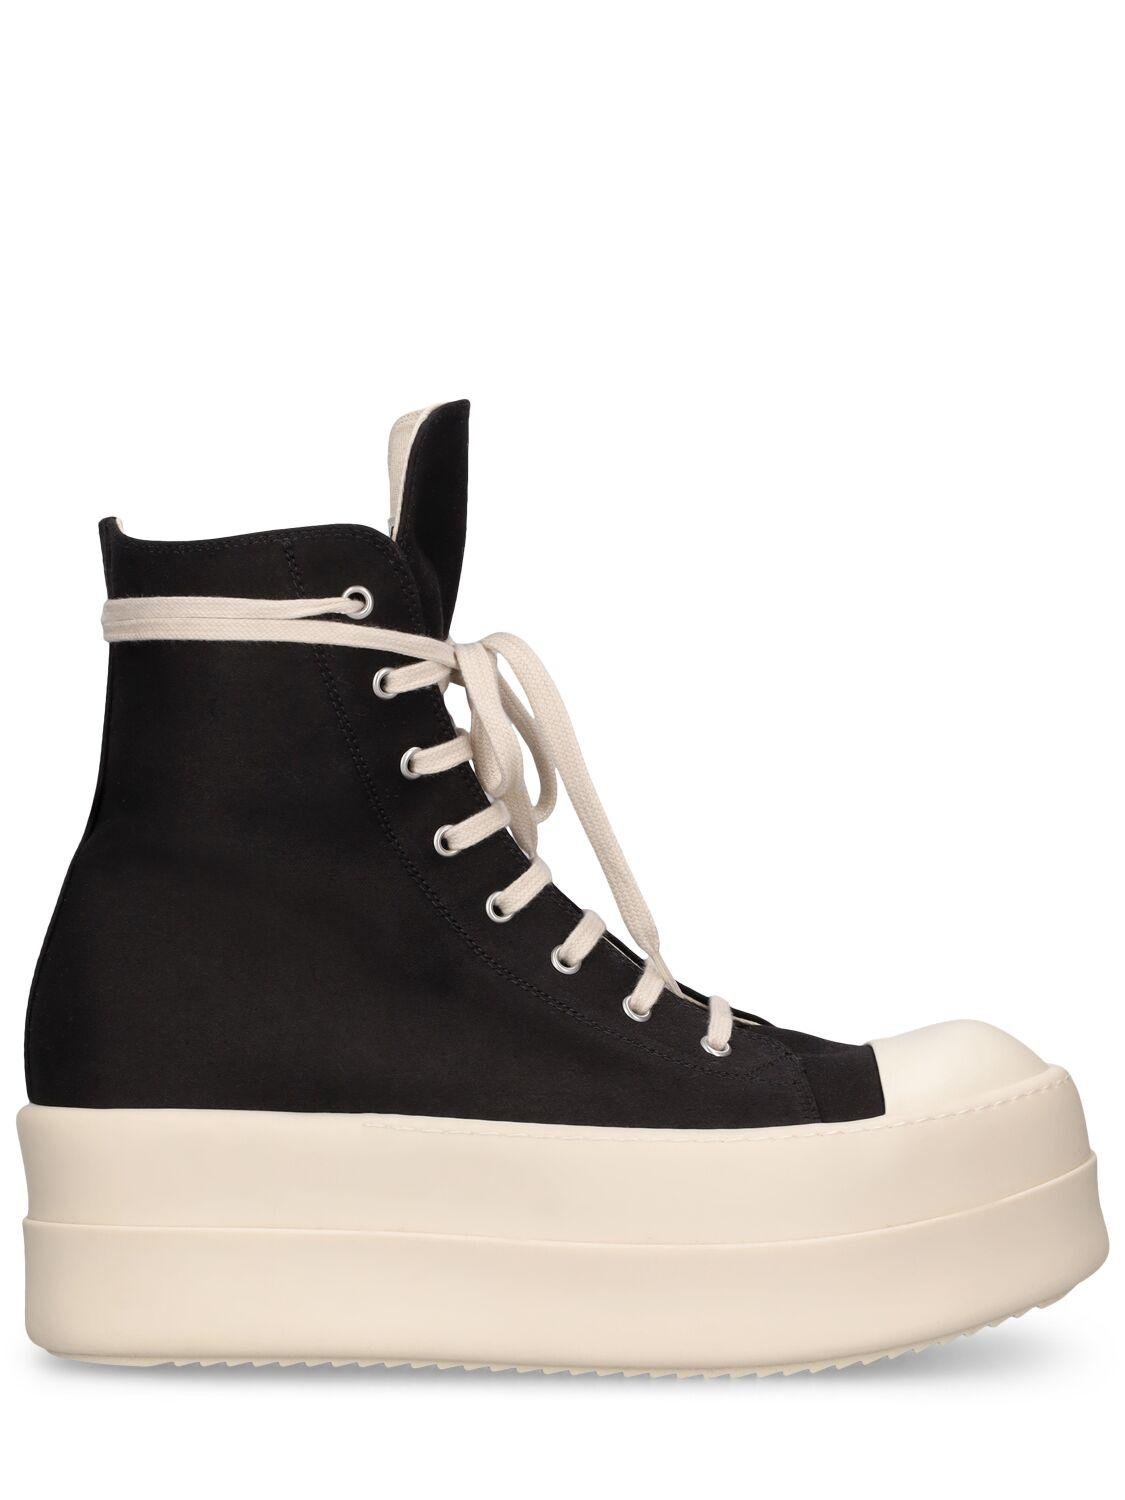 Double Bumper High Top Sneakers by RICK OWENS DRKSHDW